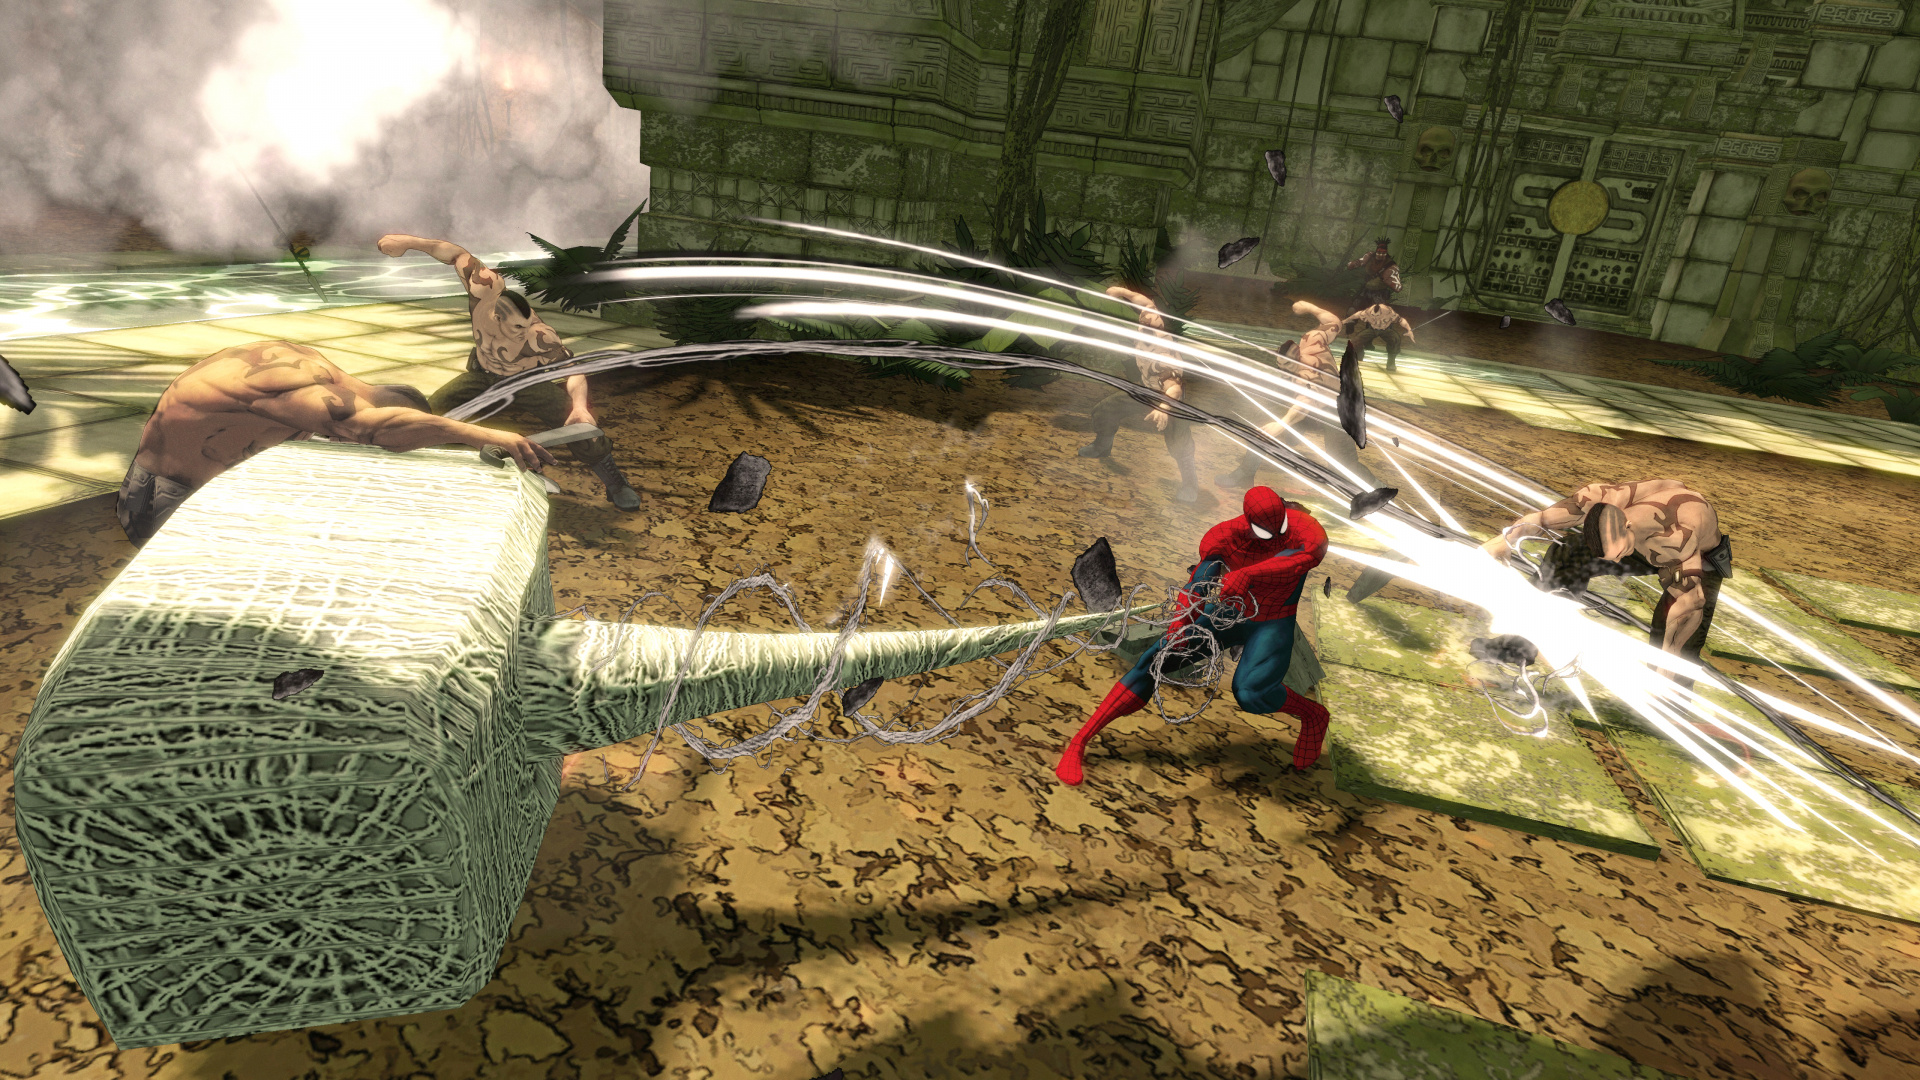 Spider-Man Shattered Dimensions, Spider-man, Xbox 360, Wii, Juego de Pc. Wallpaper in 1920x1080 Resolution